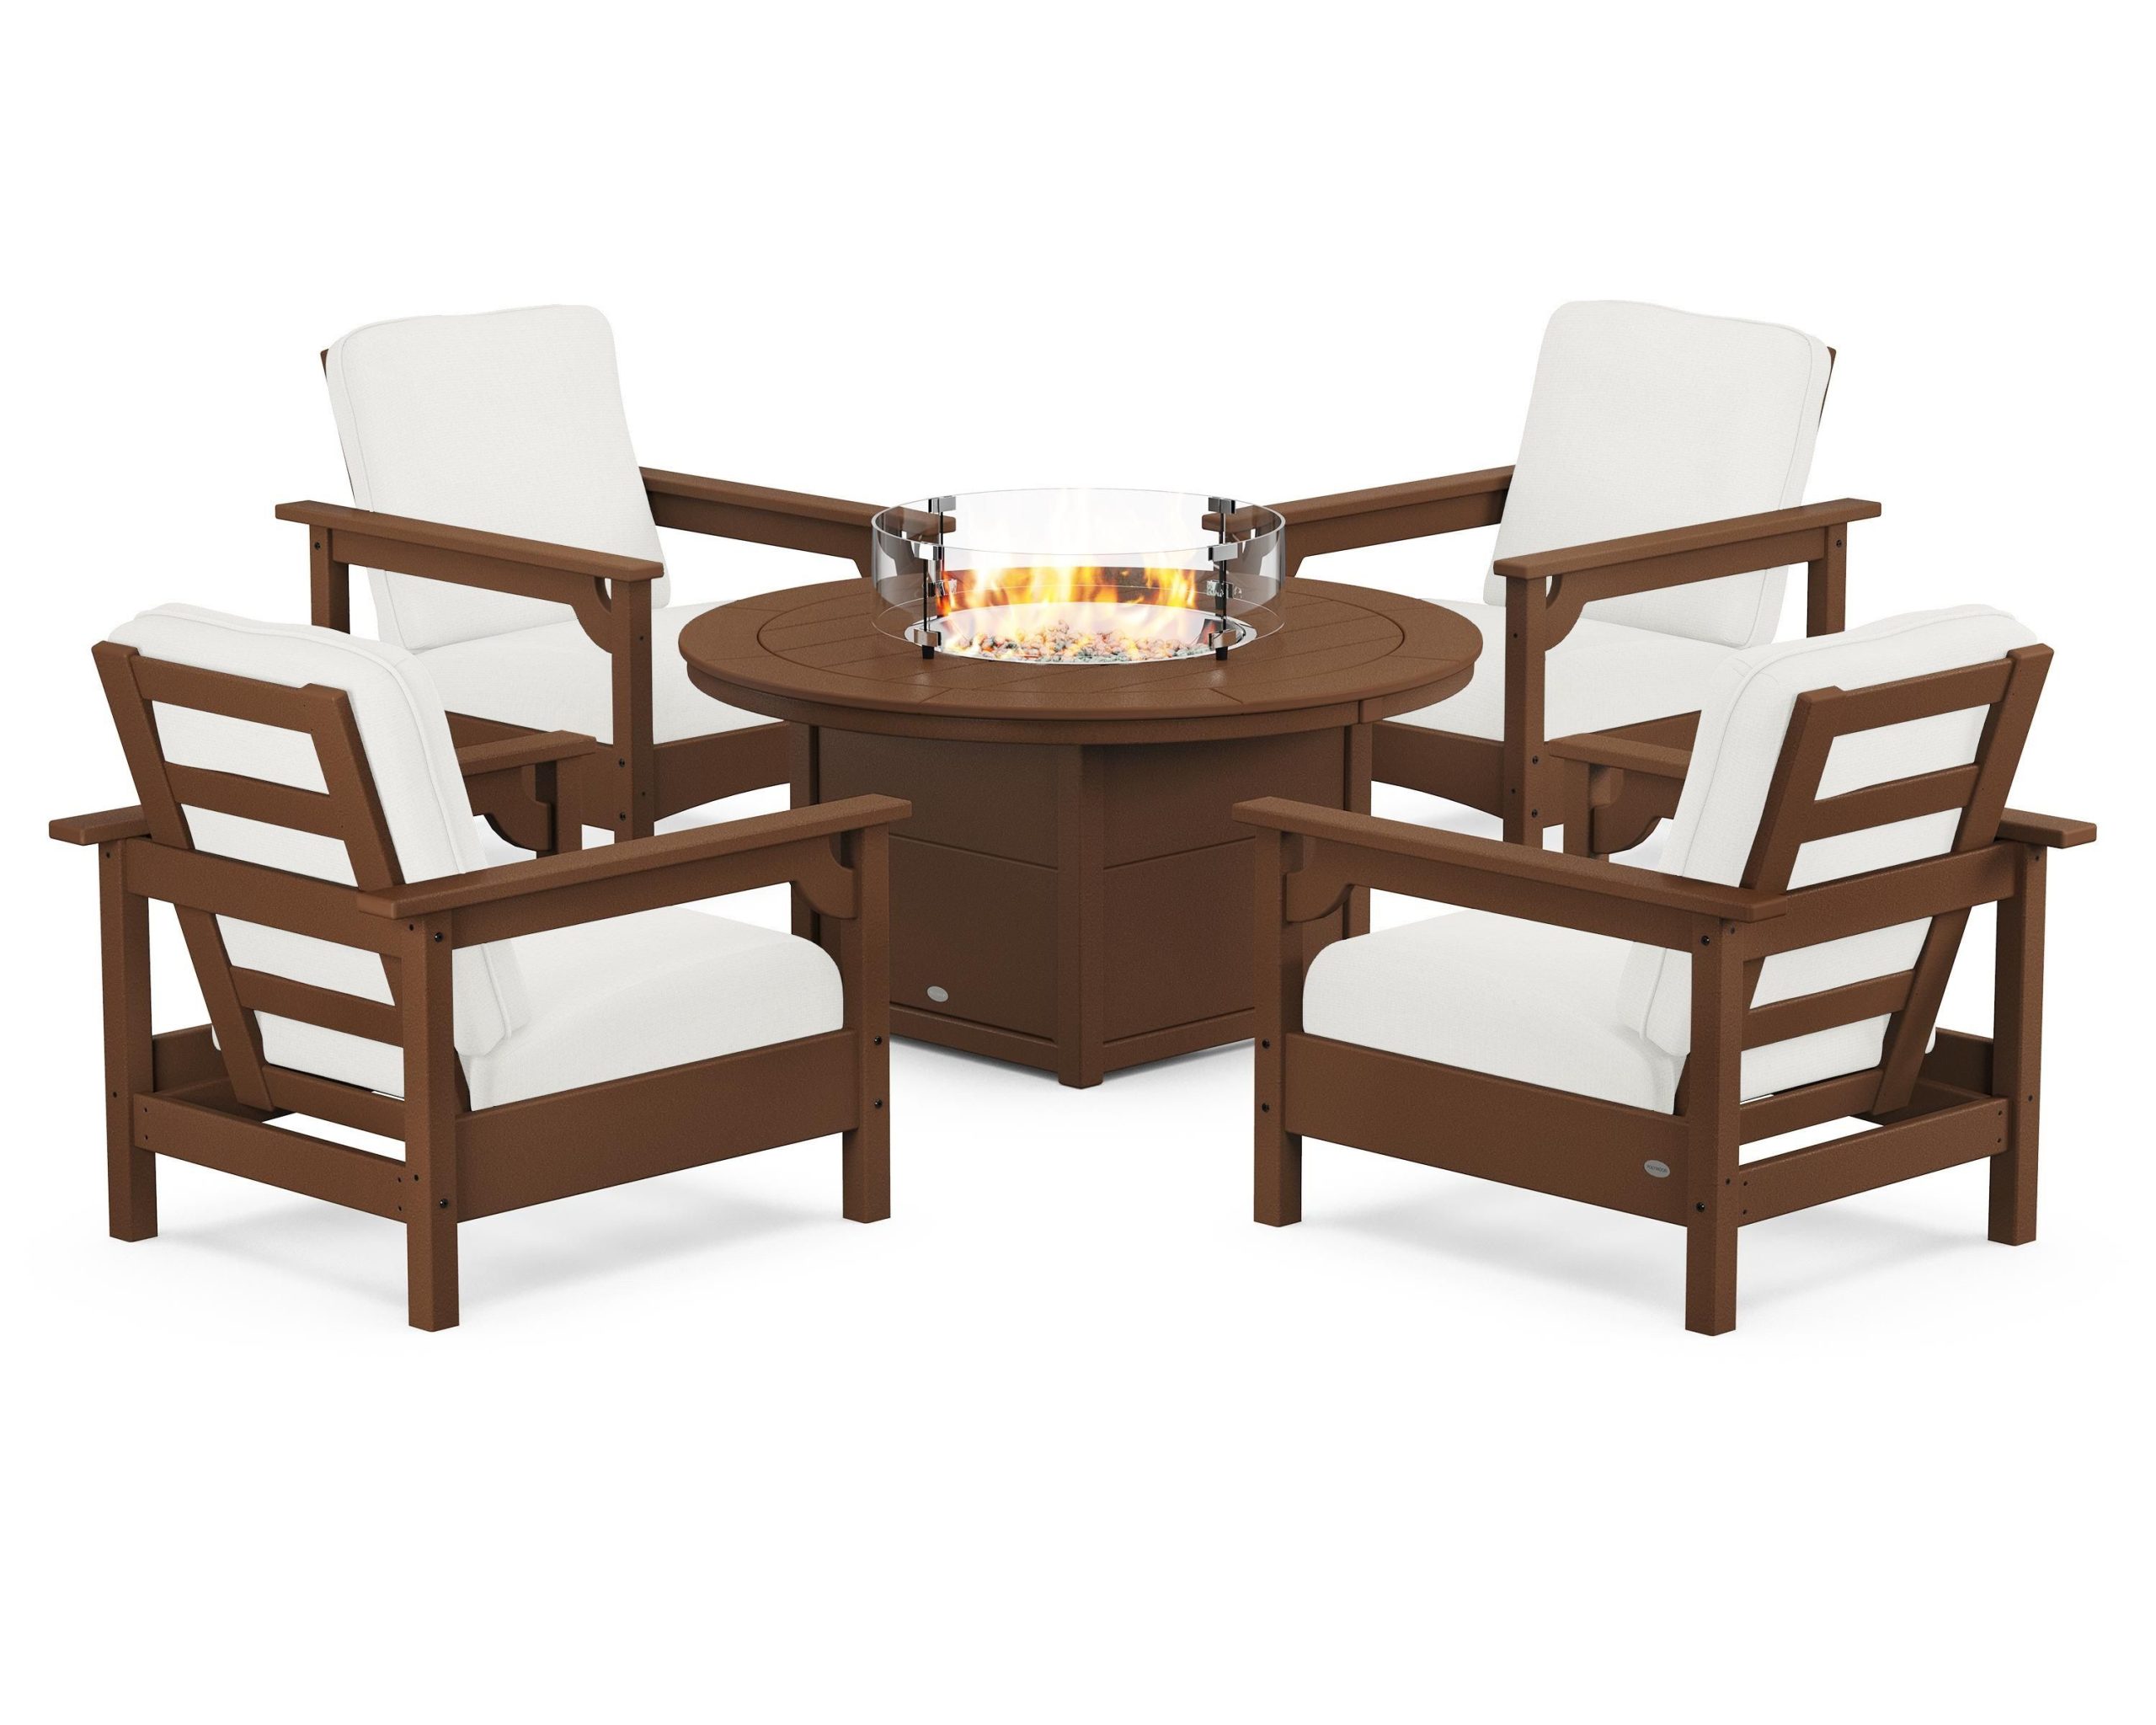 Outdoor fire pit table teak wood